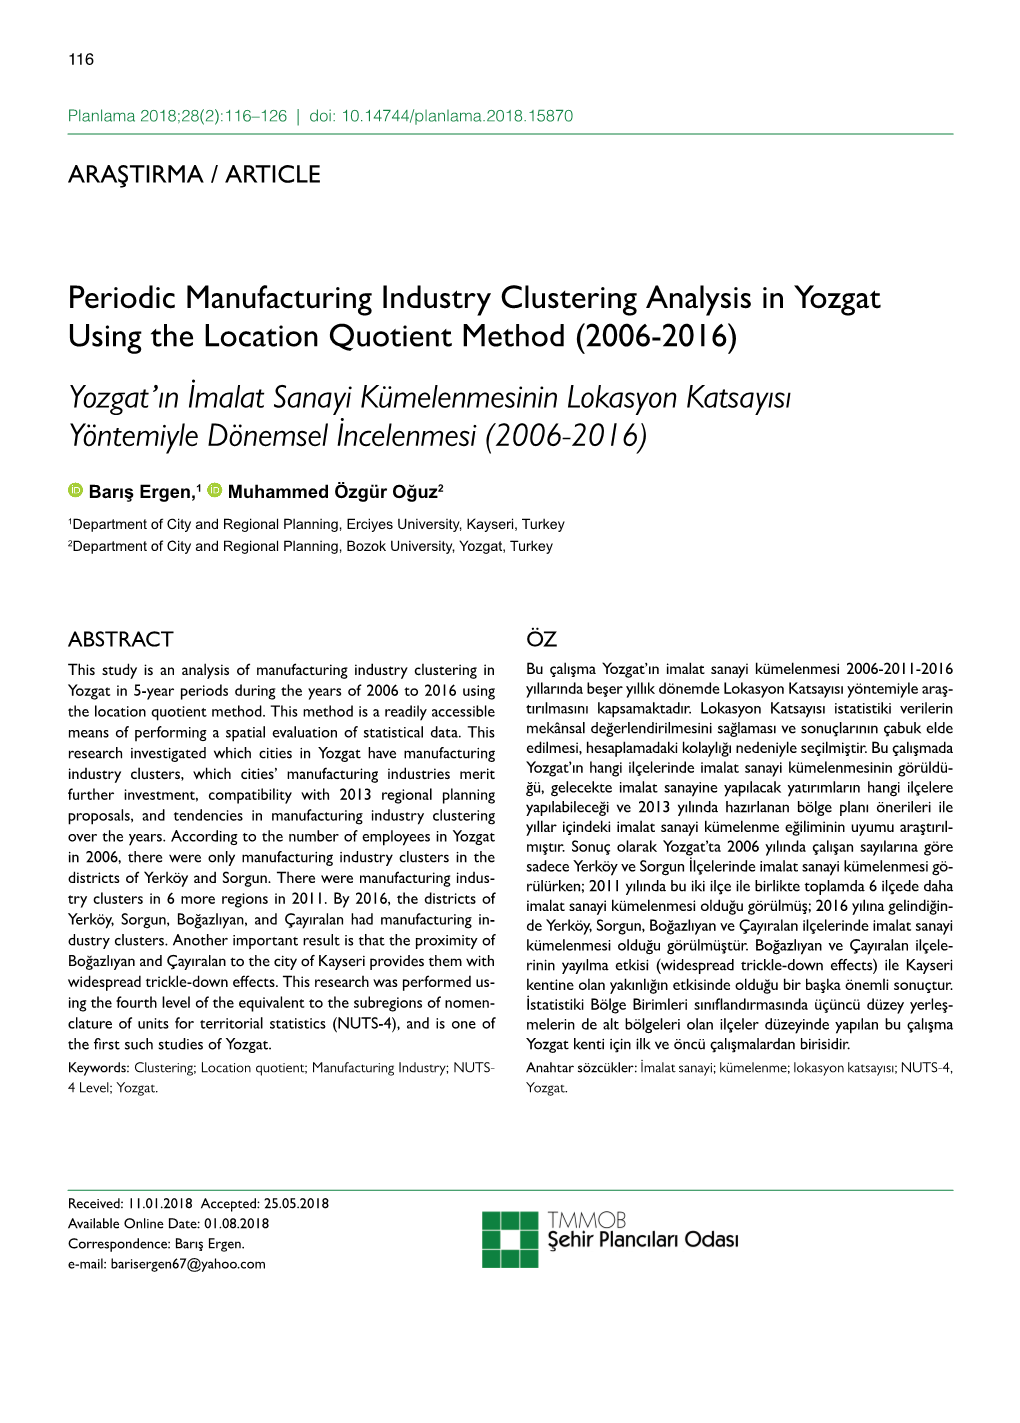 Periodic Manufacturing Industry Clustering Analysis